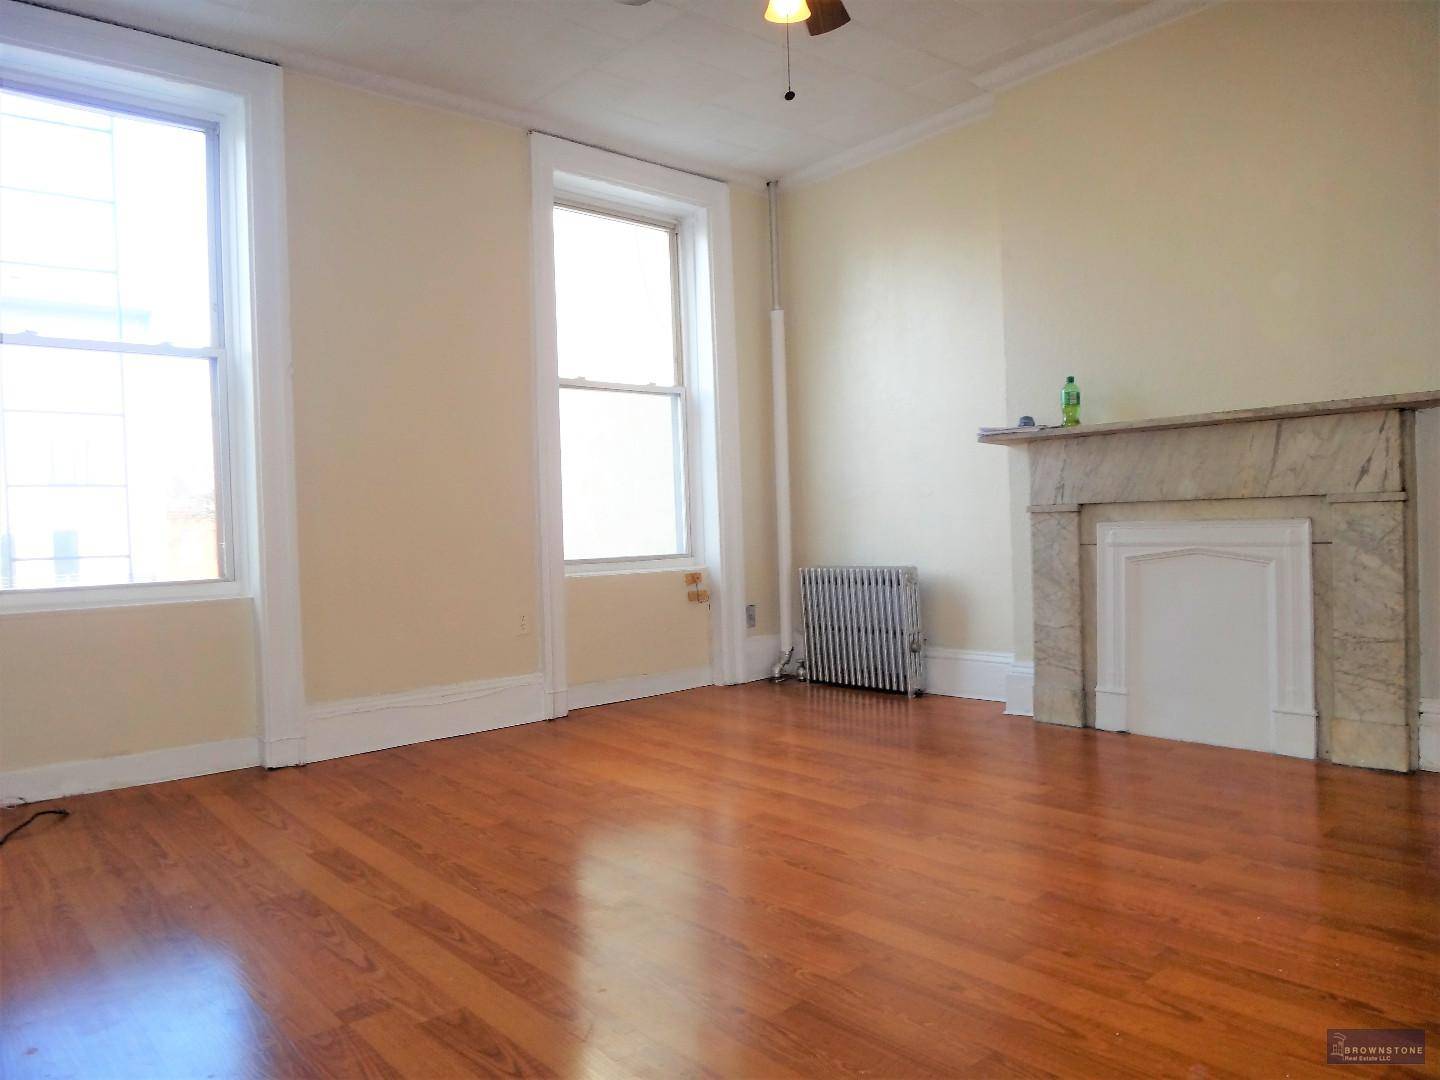 Welcome home to this terrific charming one bedroom with two dens in an owner occupied brownstone near Smith Street and the Carroll Street subway station.